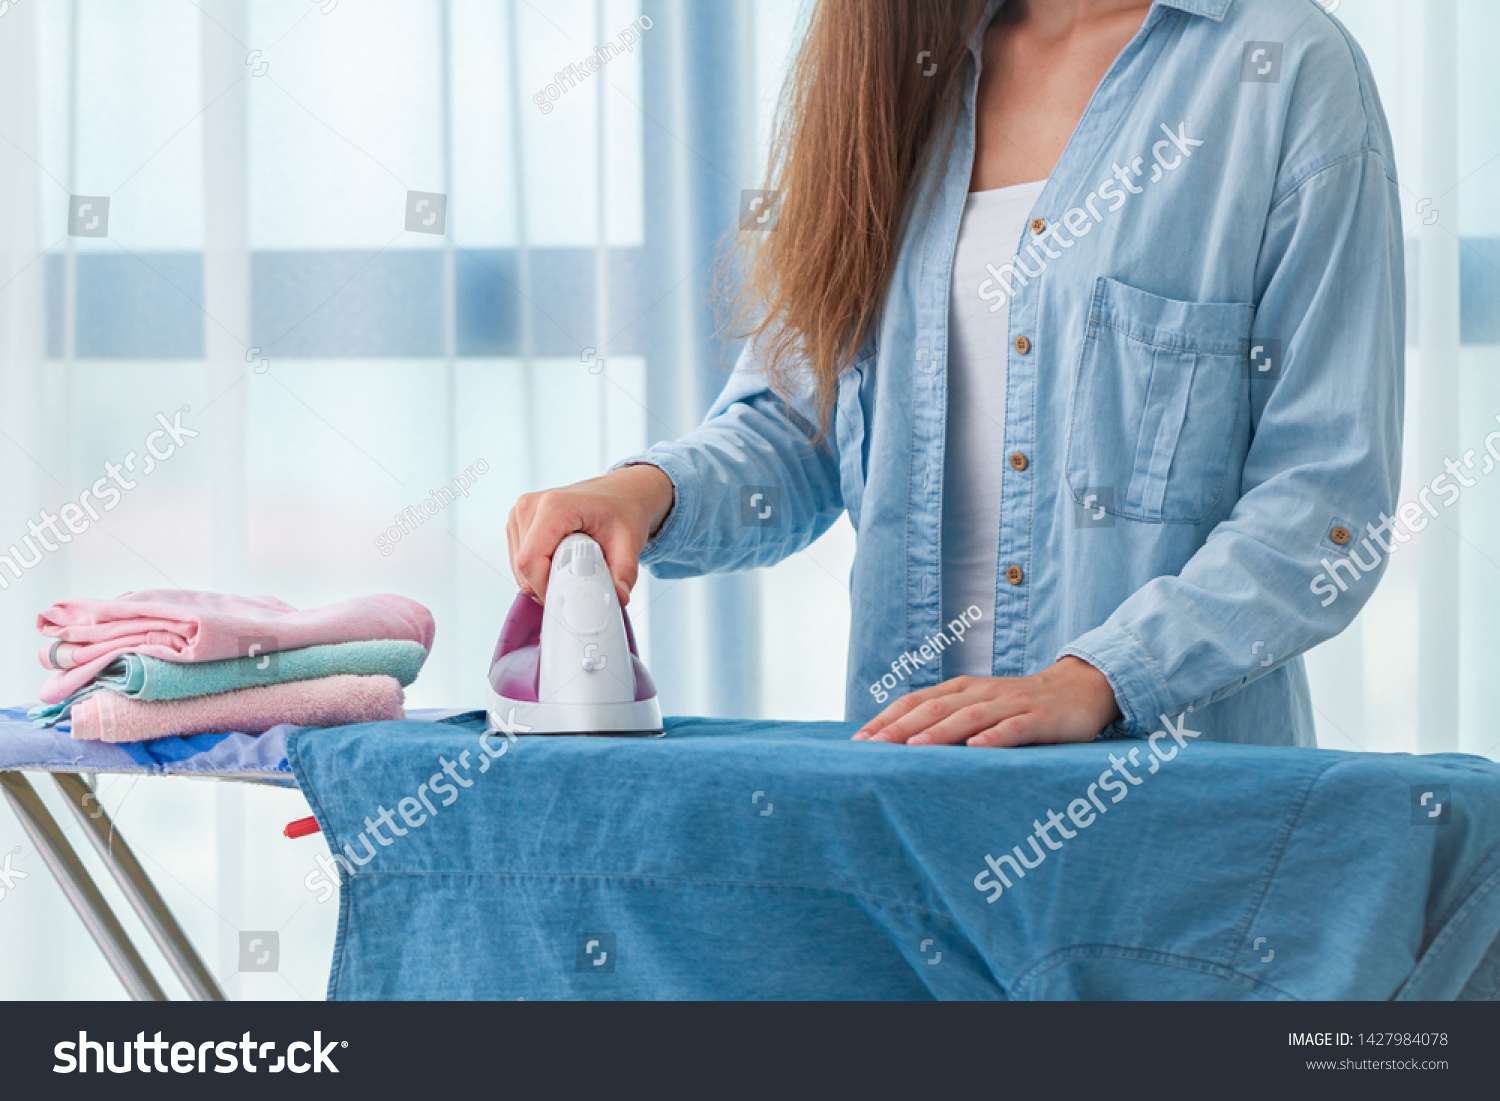 Using iron for ironing clothes after laundry at home  #1427984078